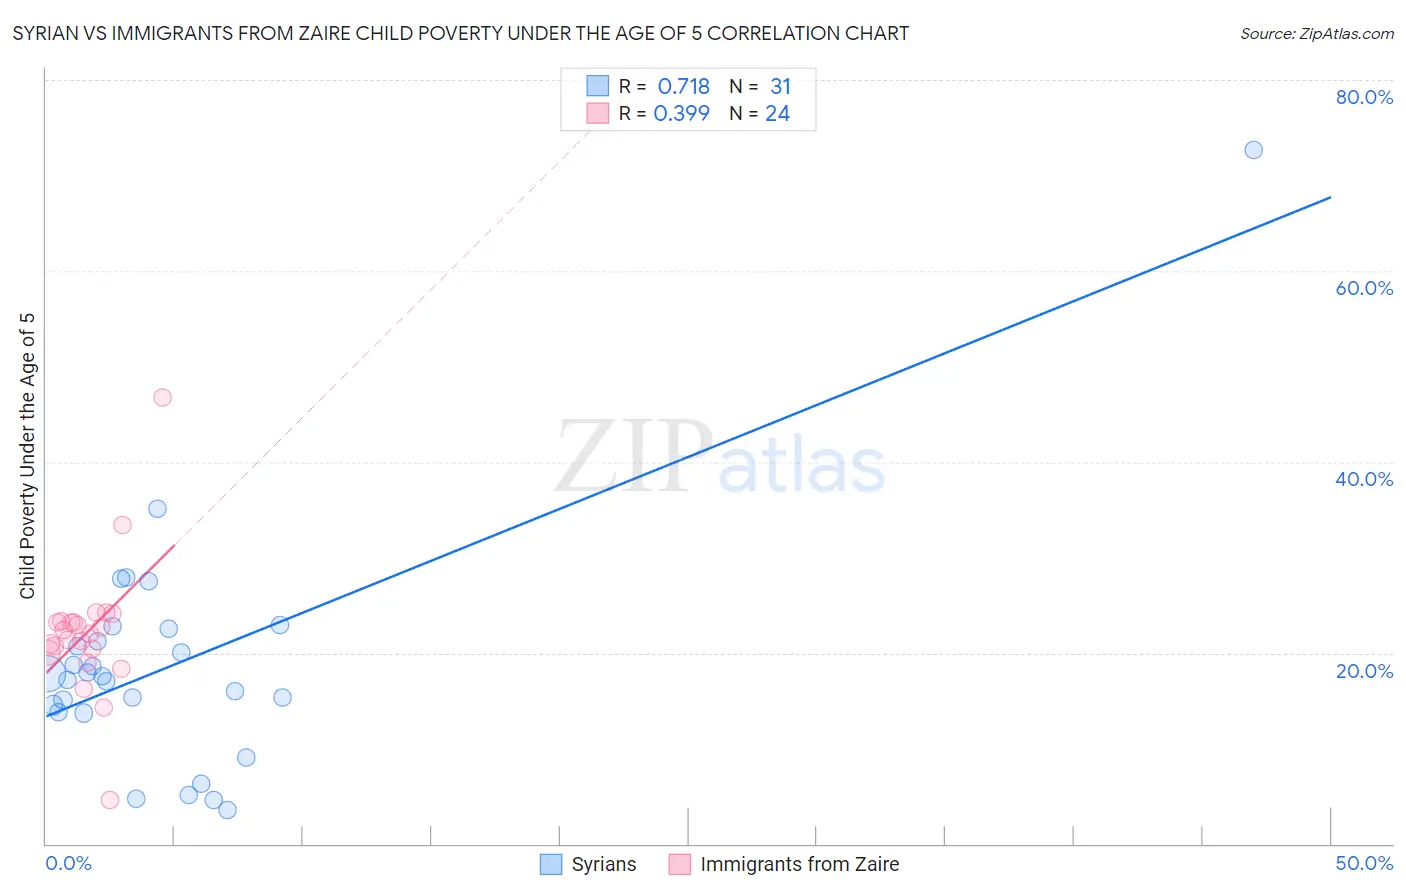 Syrian vs Immigrants from Zaire Child Poverty Under the Age of 5